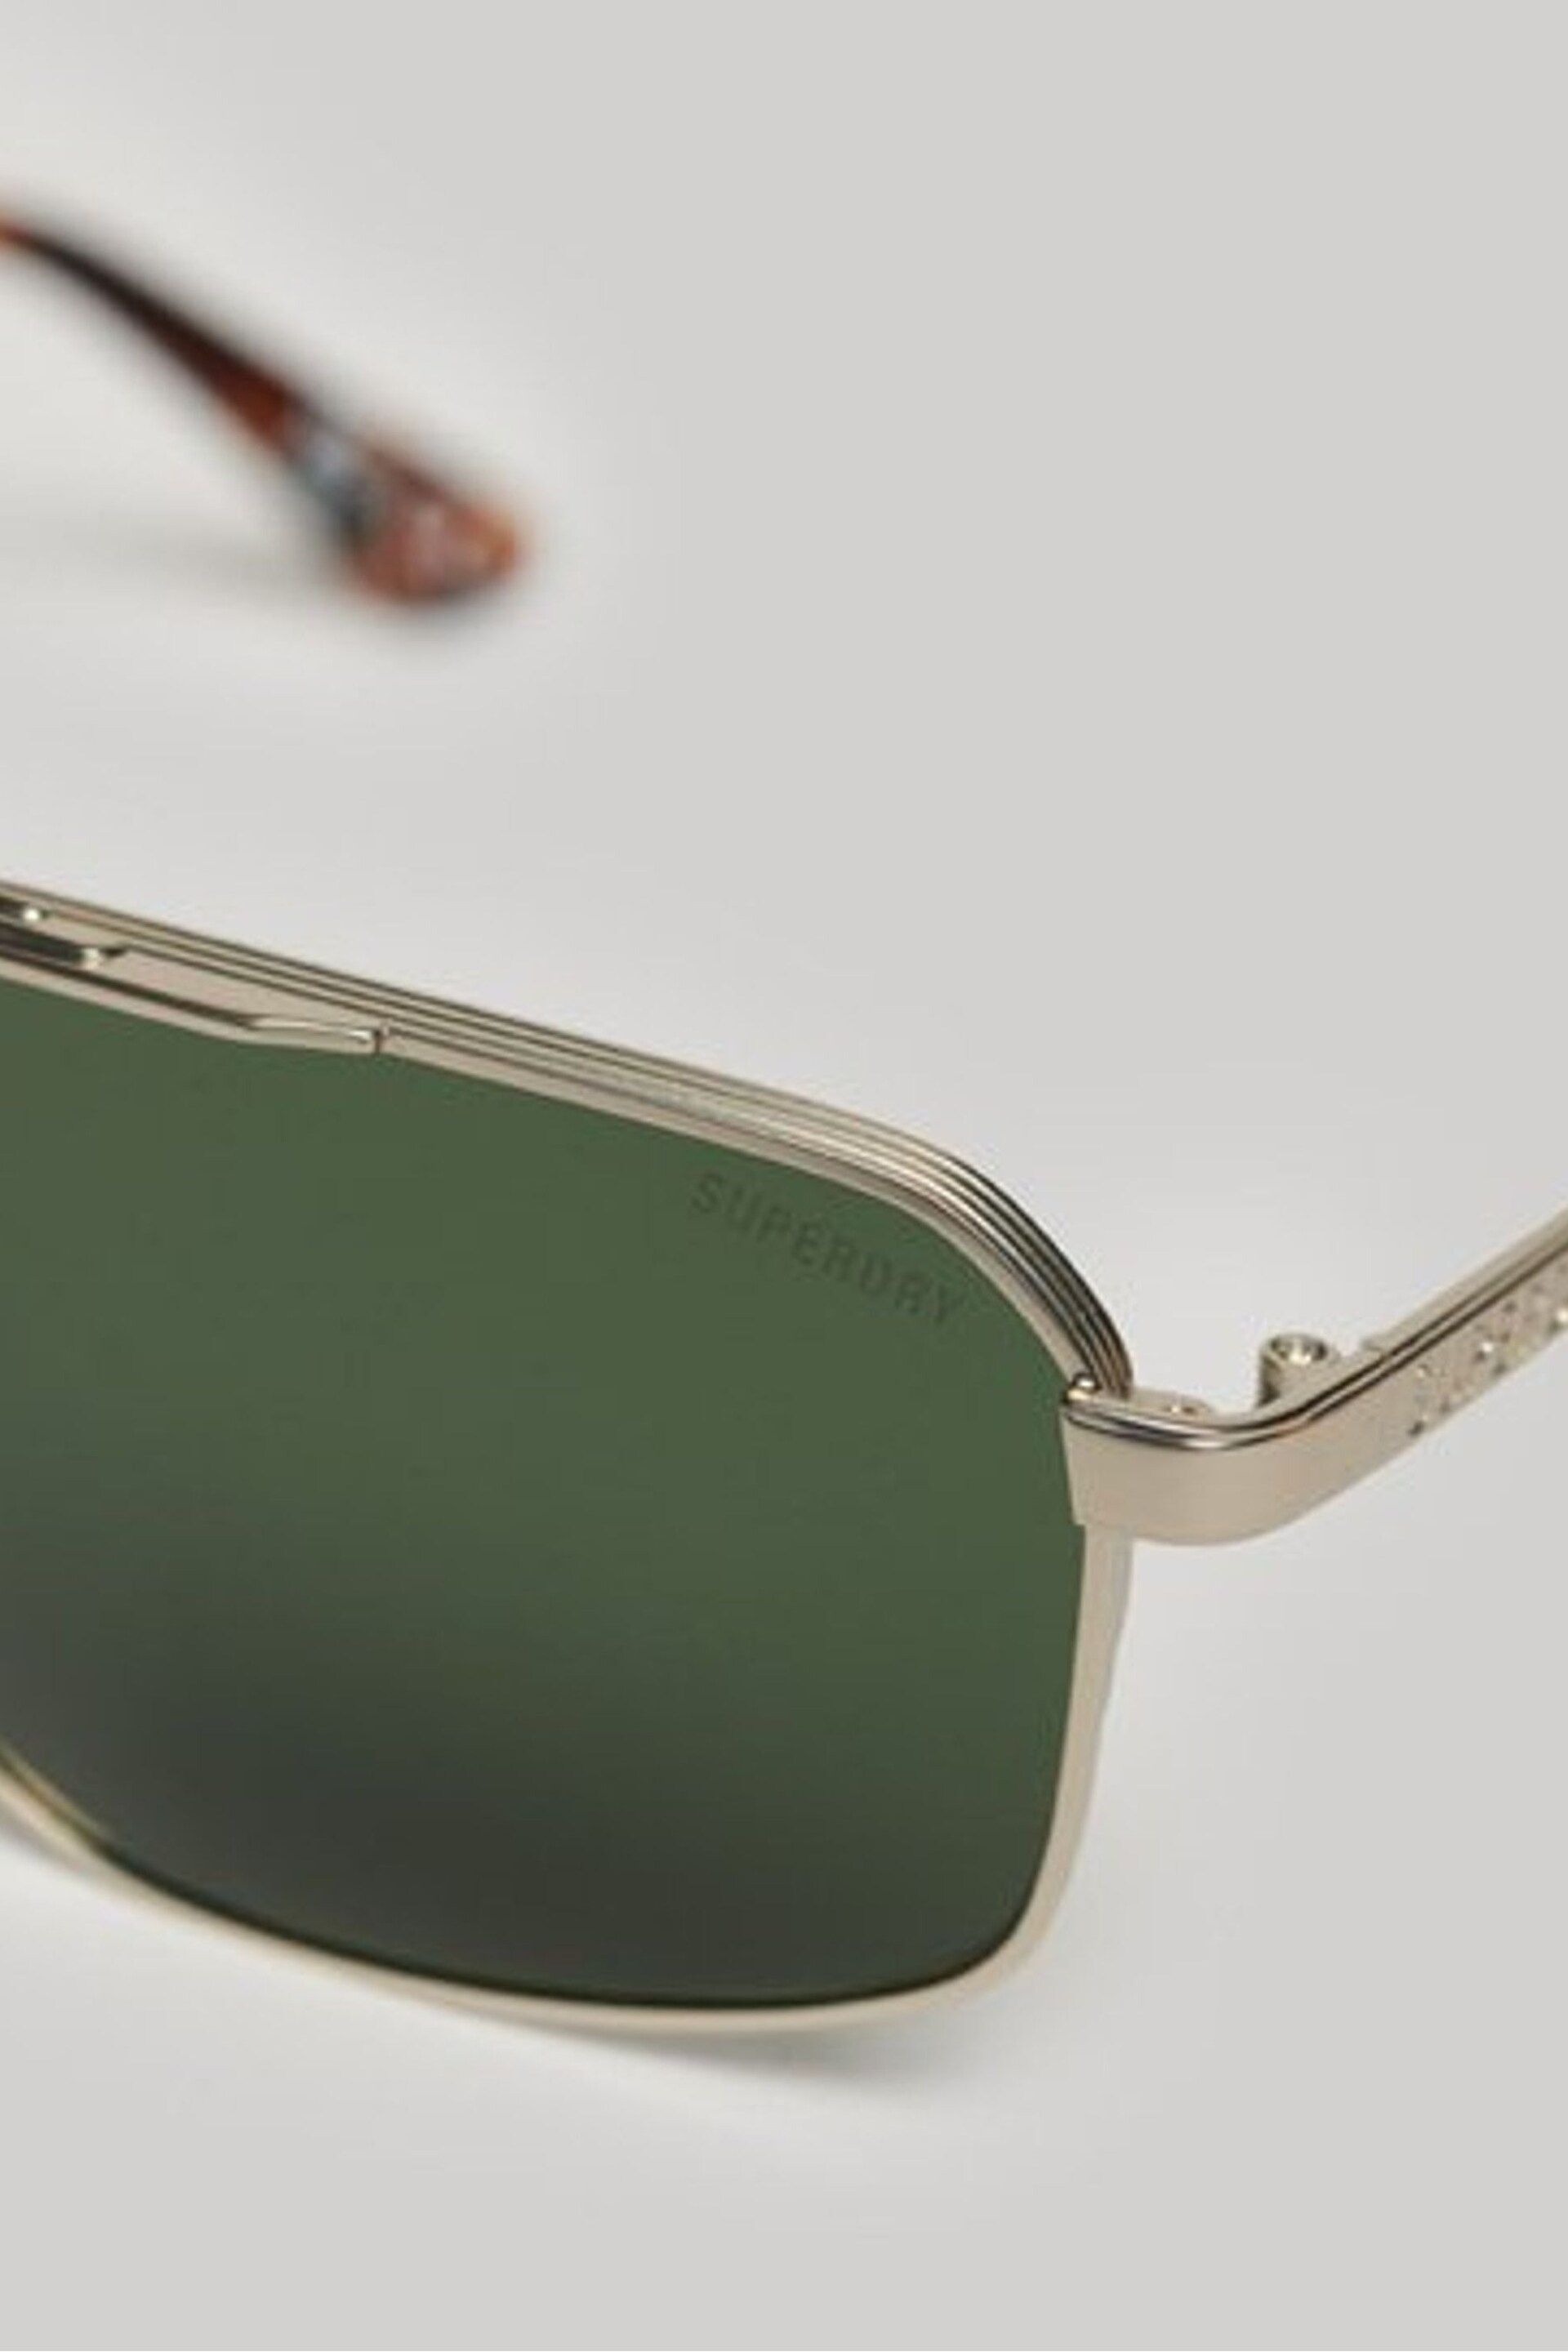 Superdry Gold SDR Coleman Sunglasses - Image 3 of 4